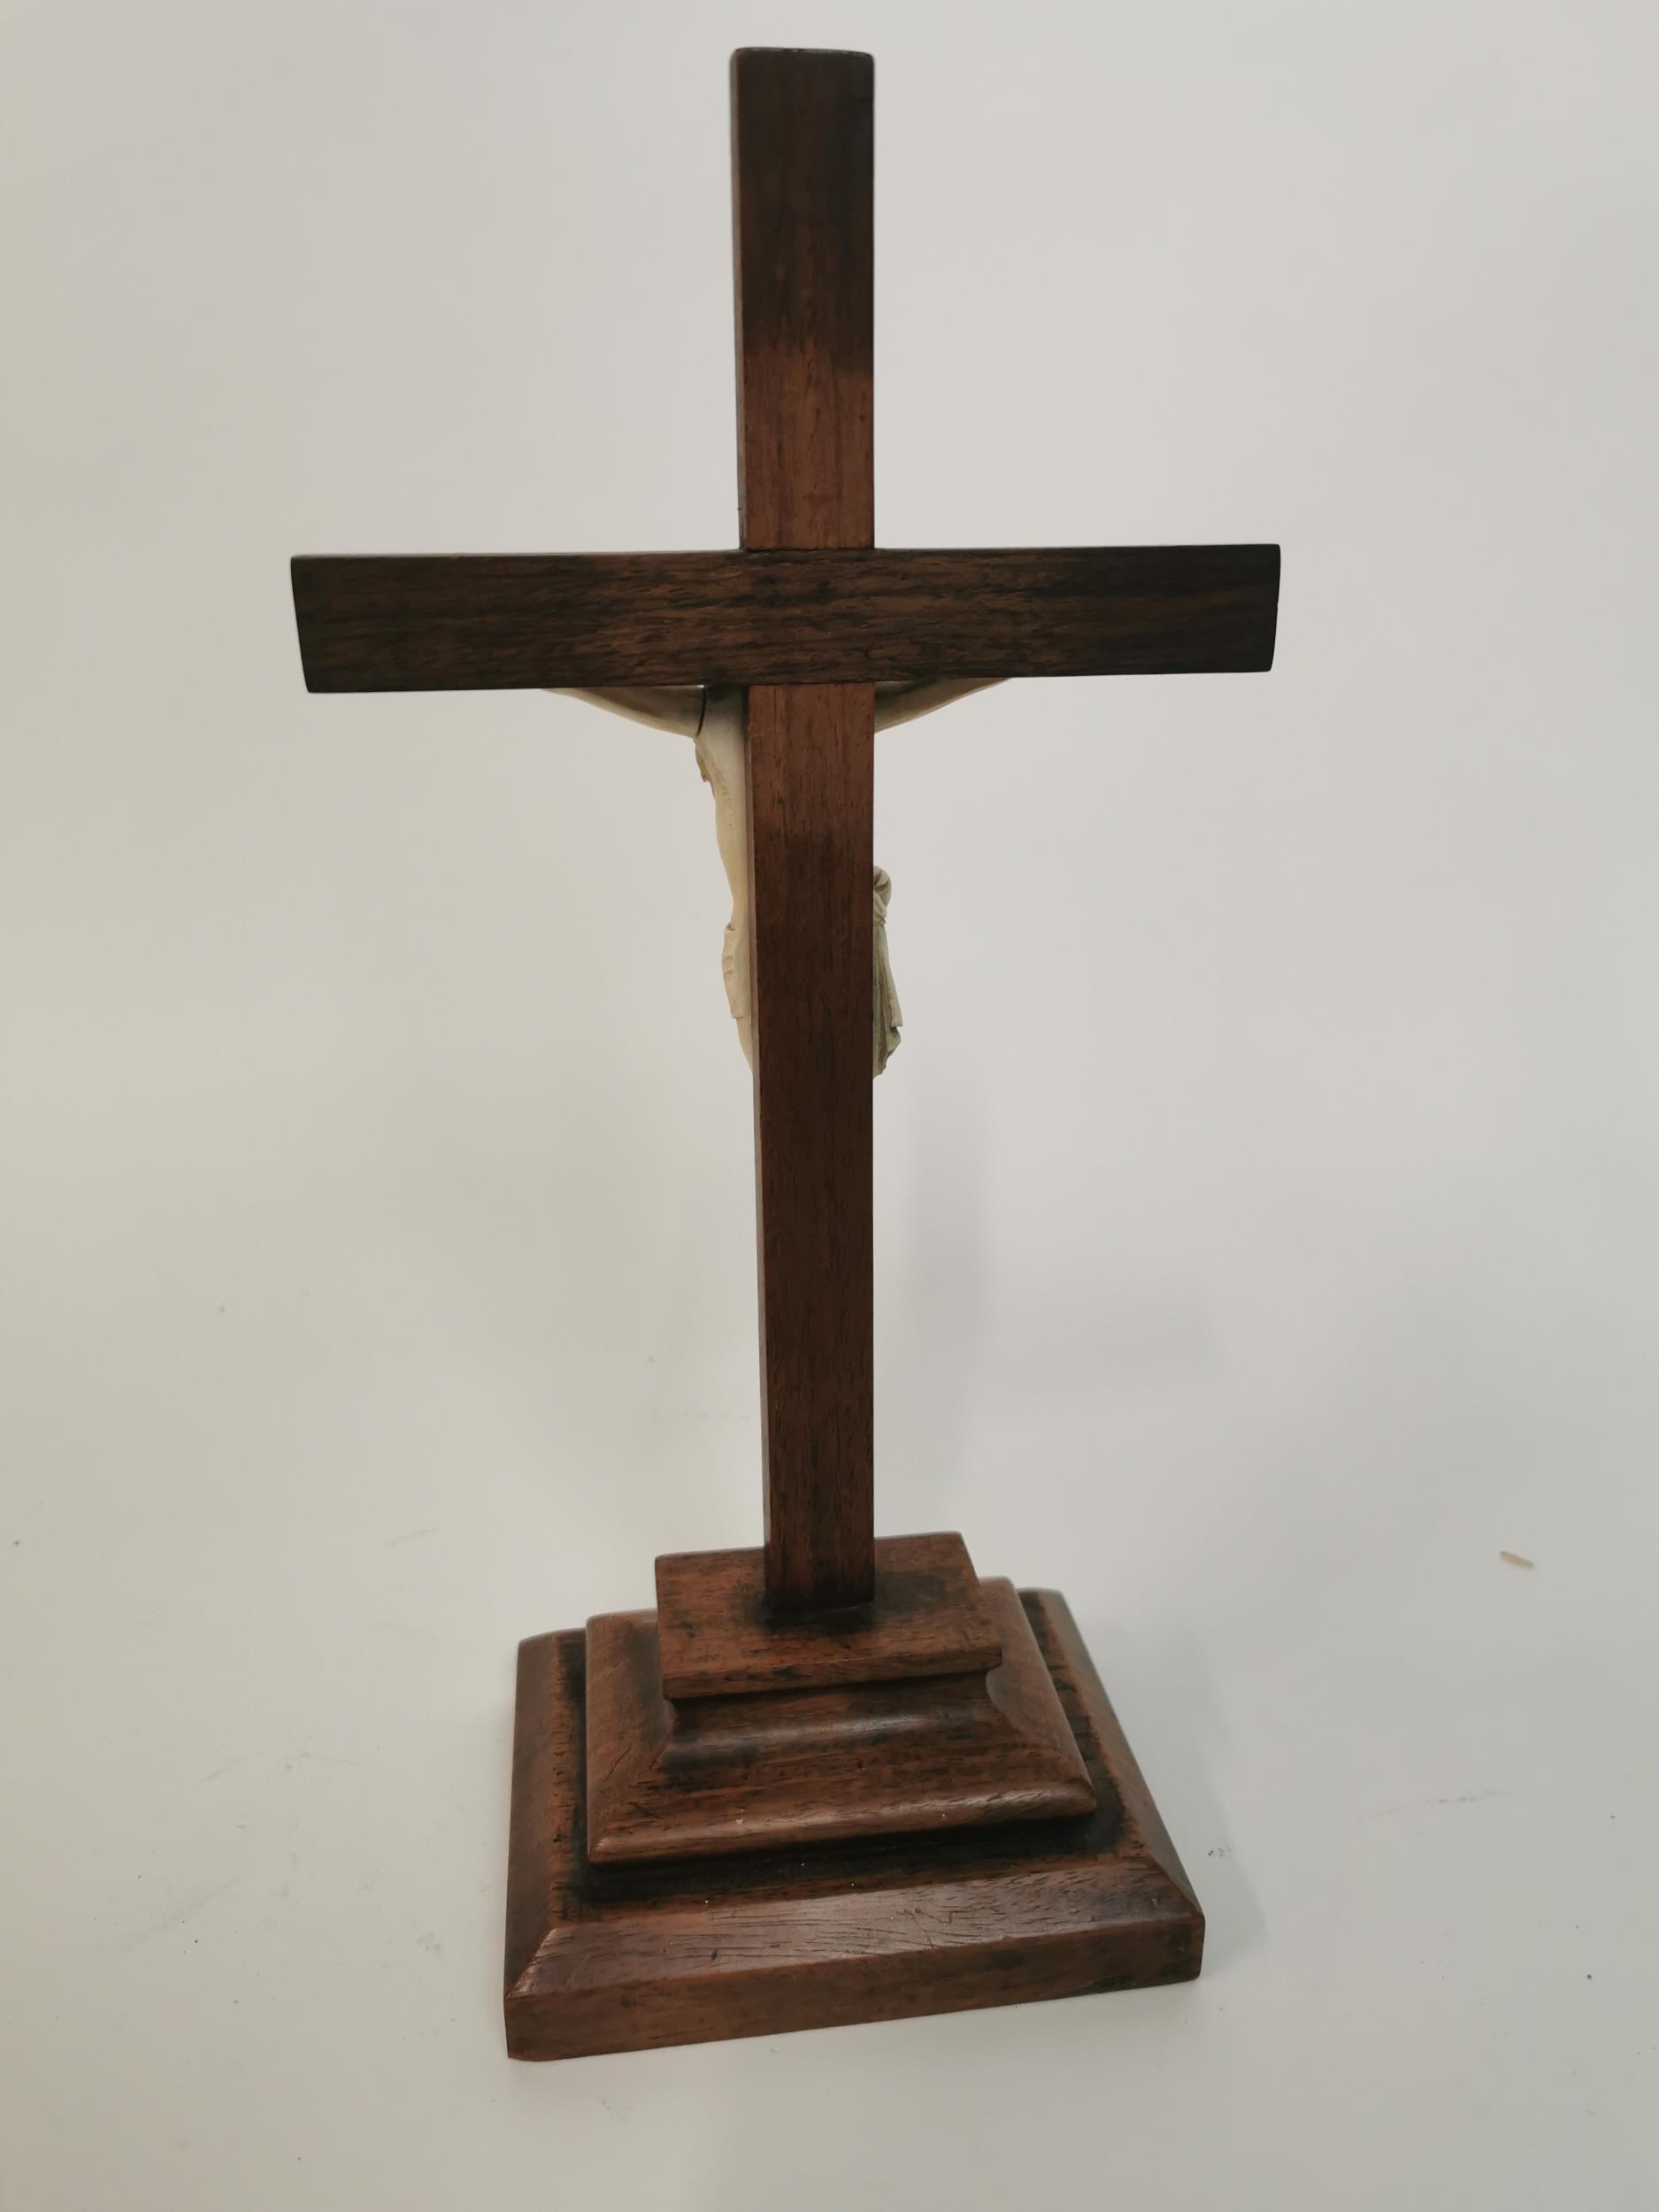 Carved oak and Ivory Crucifix. {34 cm H x 17 cm W x 11 cm D}. - Image 6 of 6